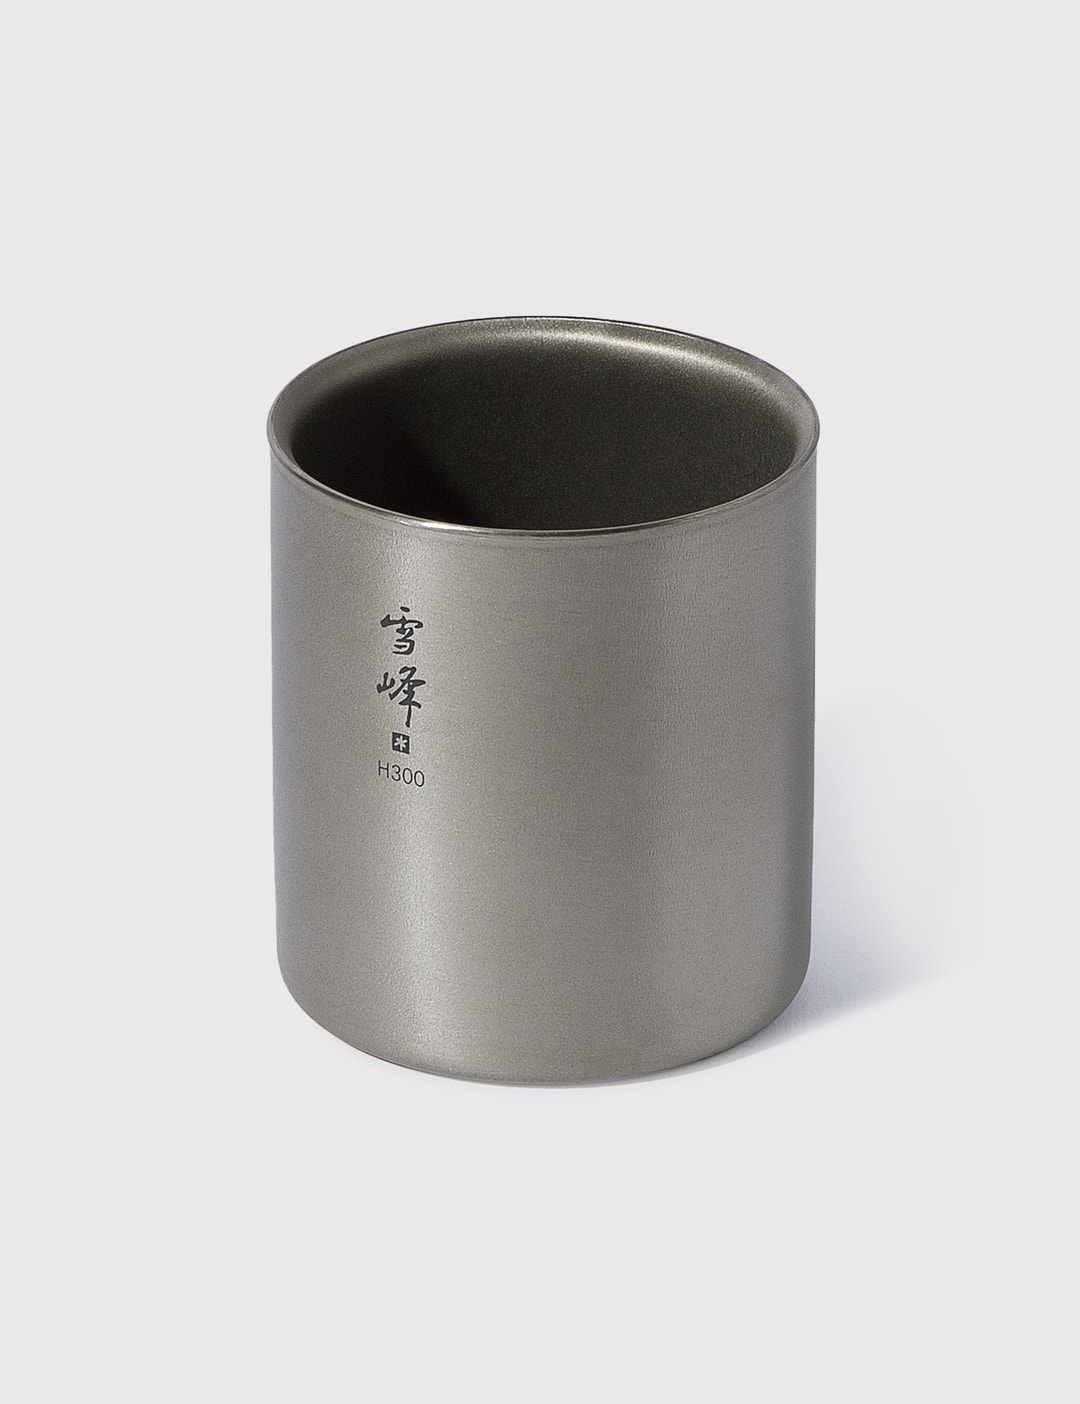 Snow Peak - Ti-Double H300 Stacking Mug | HBX - Globally Curated ...